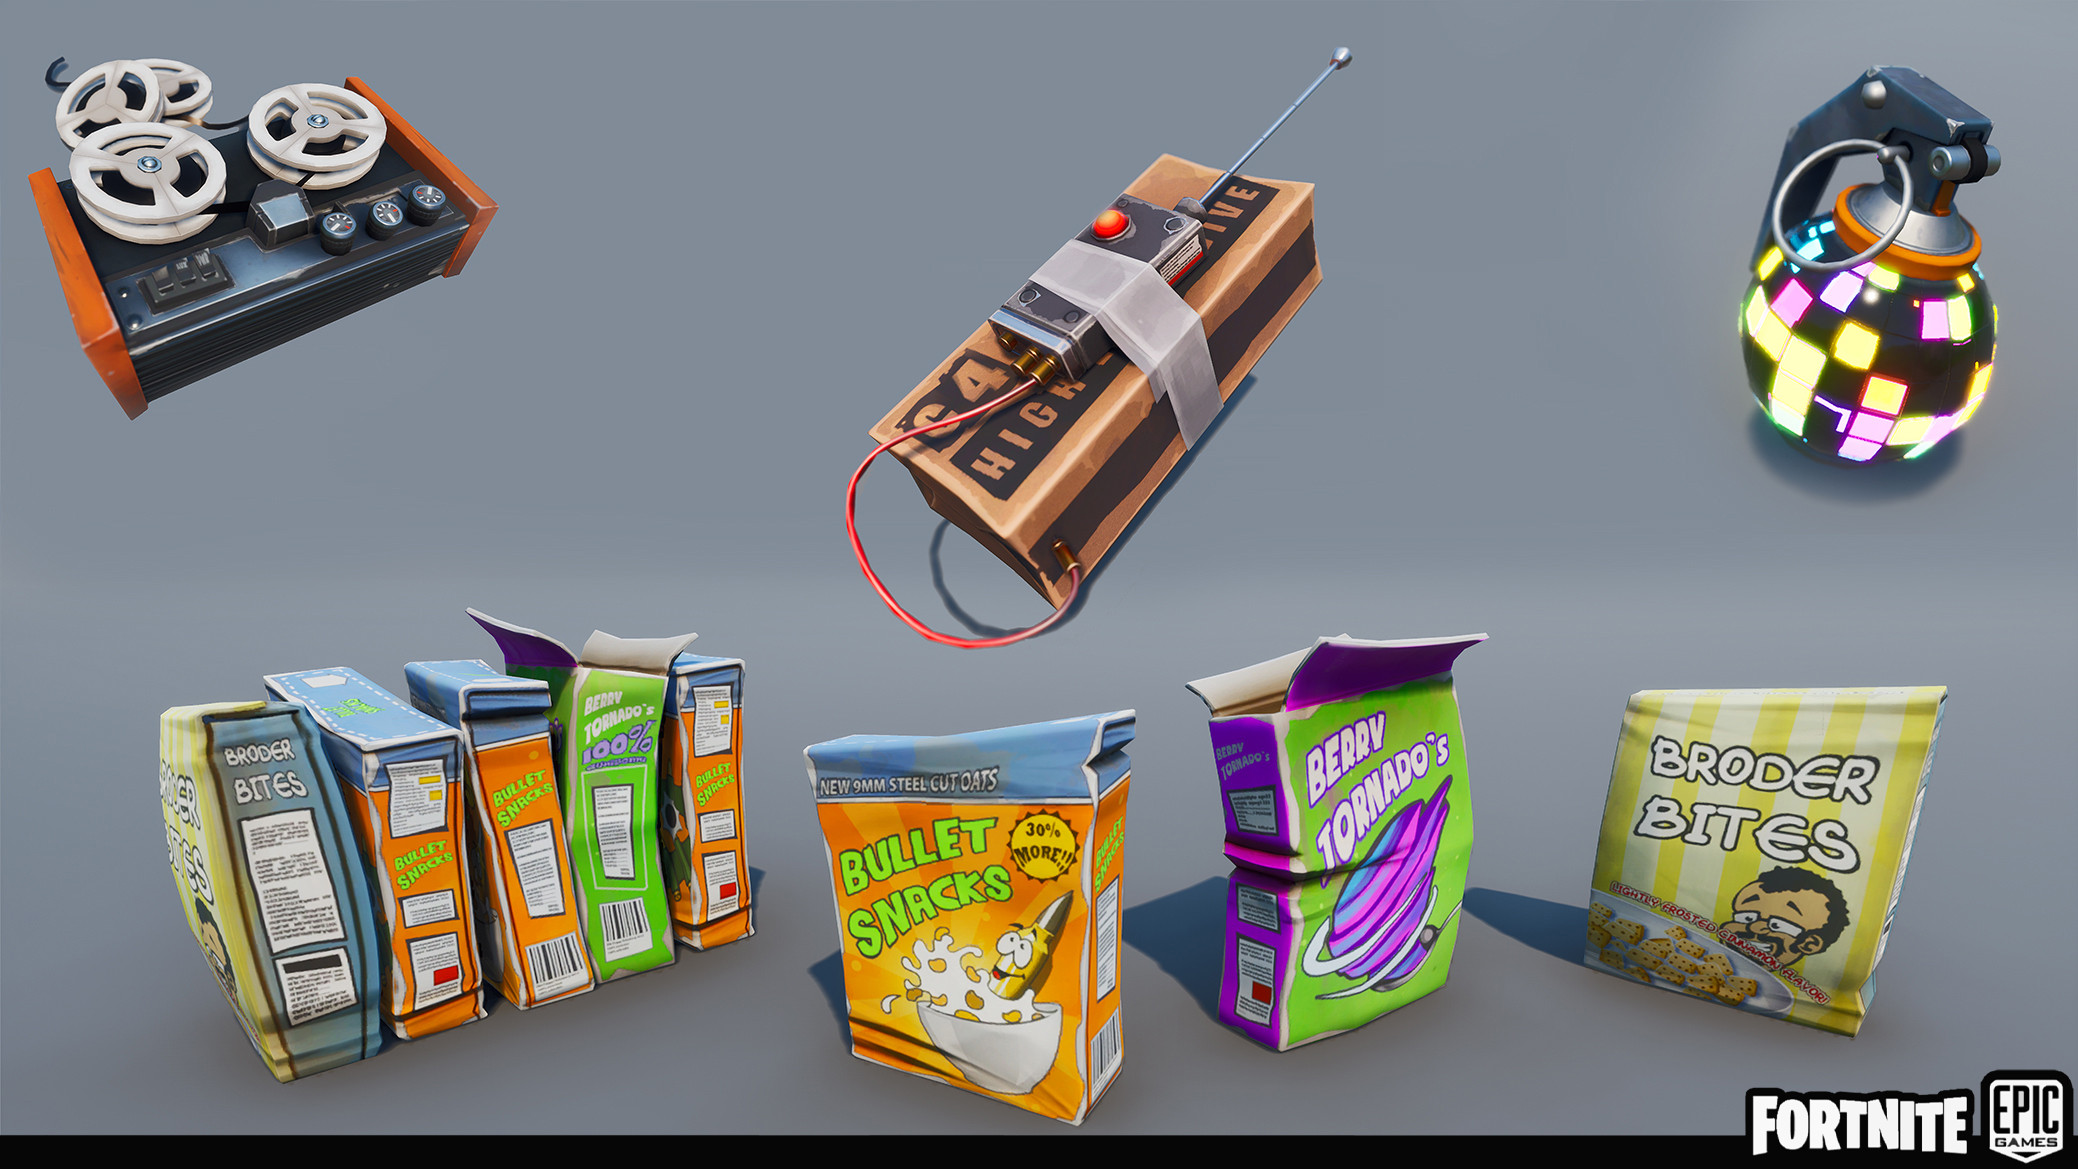 I made a lot of these smaller props and had a lot of fun doing it. The cereal boxes and boogie bomb in particular were a lot of fun.